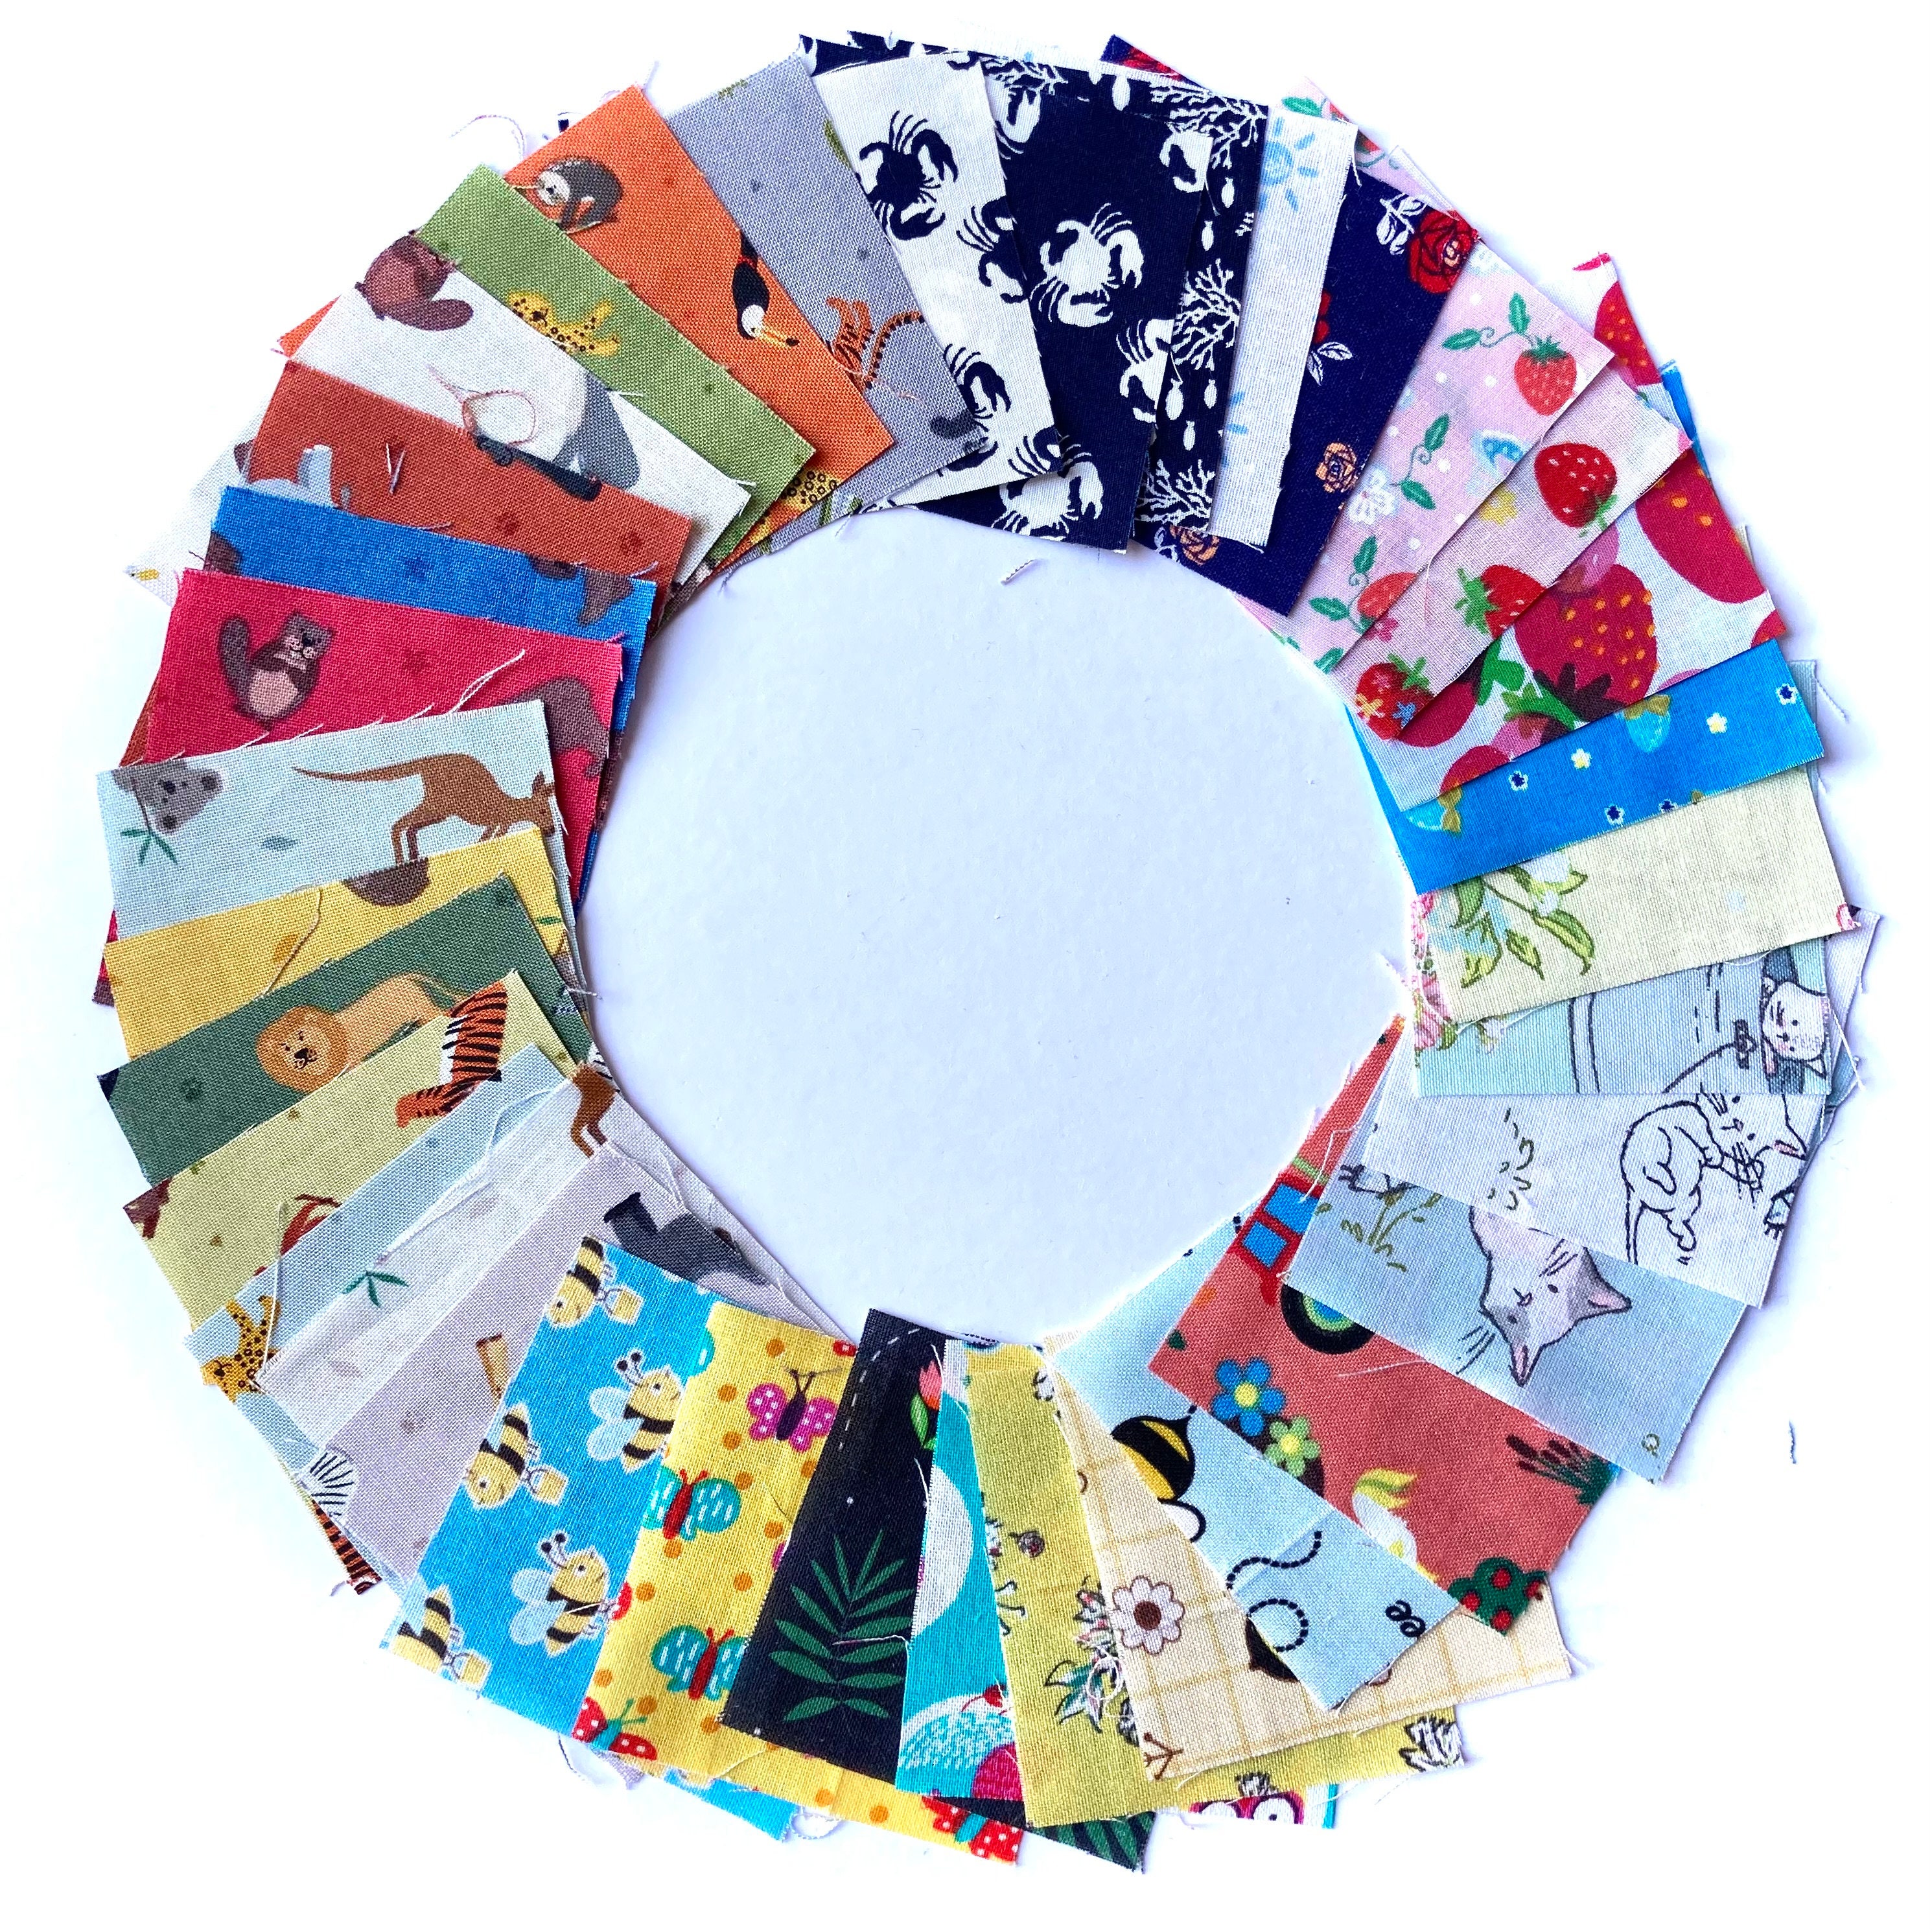 I Spy Novelty Boy Prints 50pc. White Background Prints Fussy Cut Charm Pack  100% Cotton Quilting Fabric Squares 